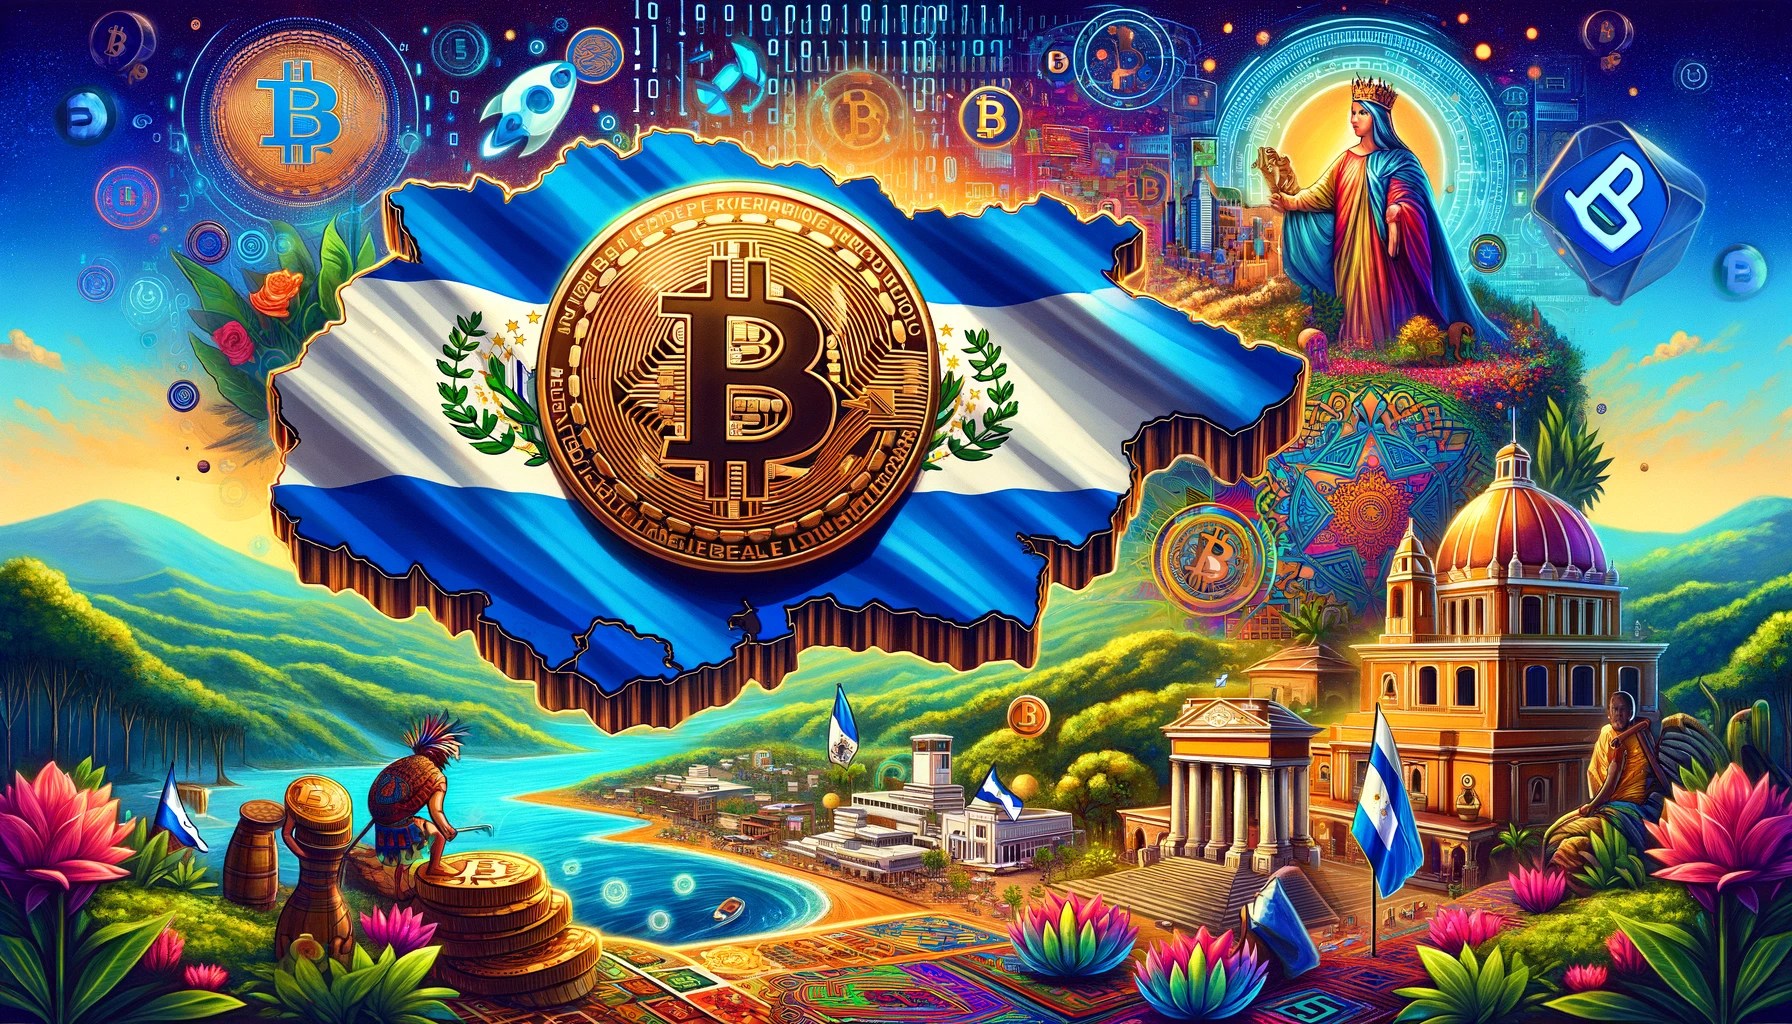 El Salvador’s Bitcoin Reserves Grow As BTC Price Surges – Here’s How Much The Country Holds